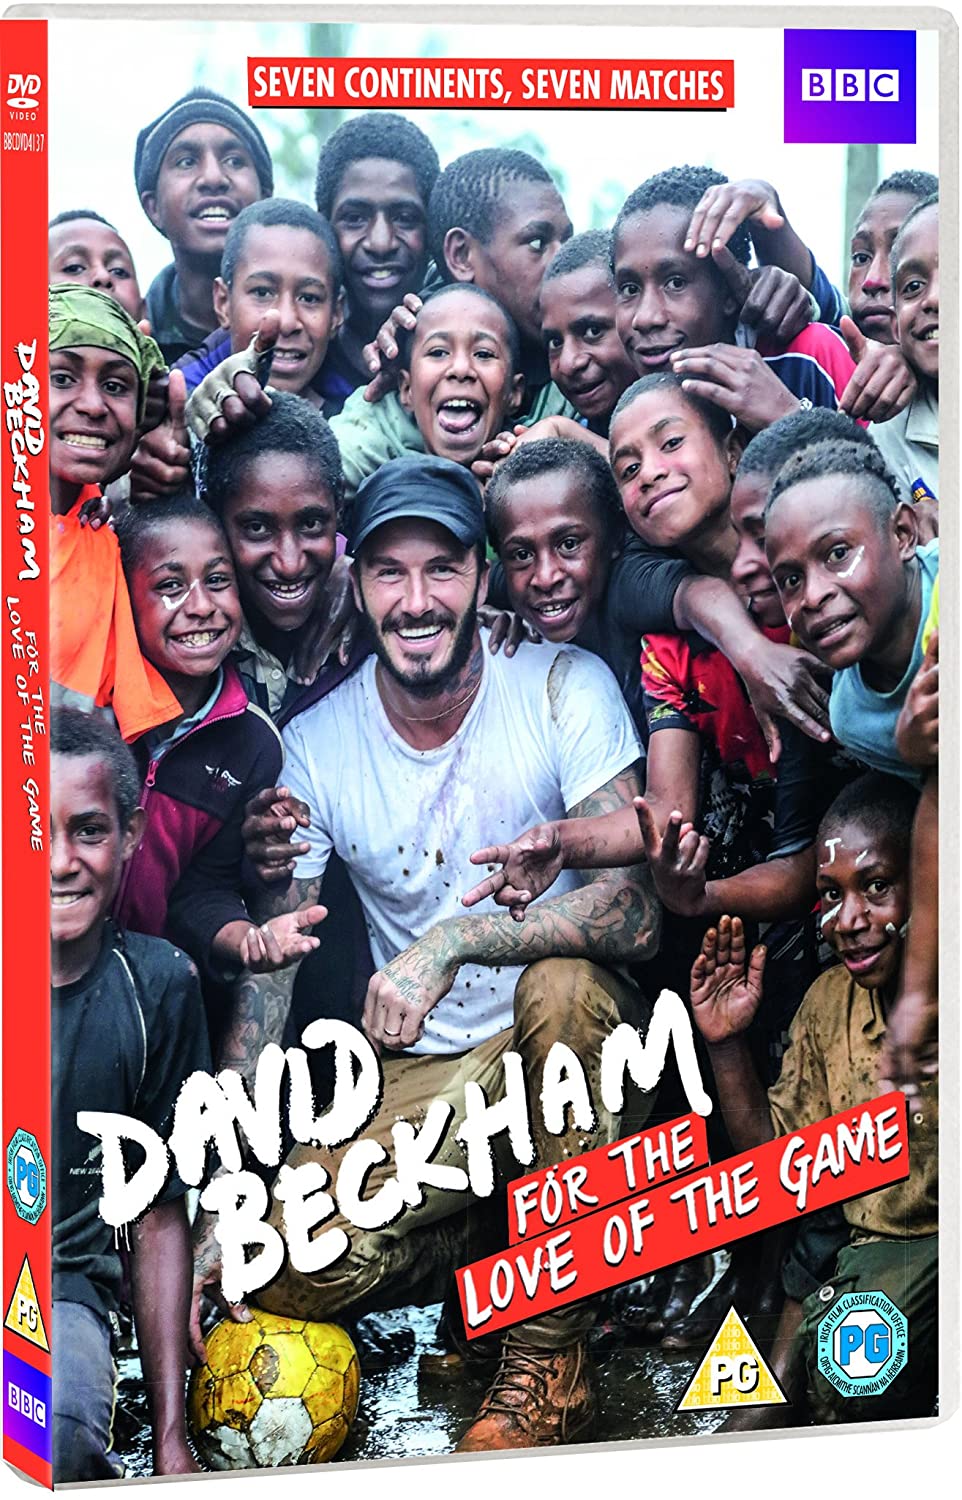 David Beckham: For the Love of the Game [DVD] [2016]